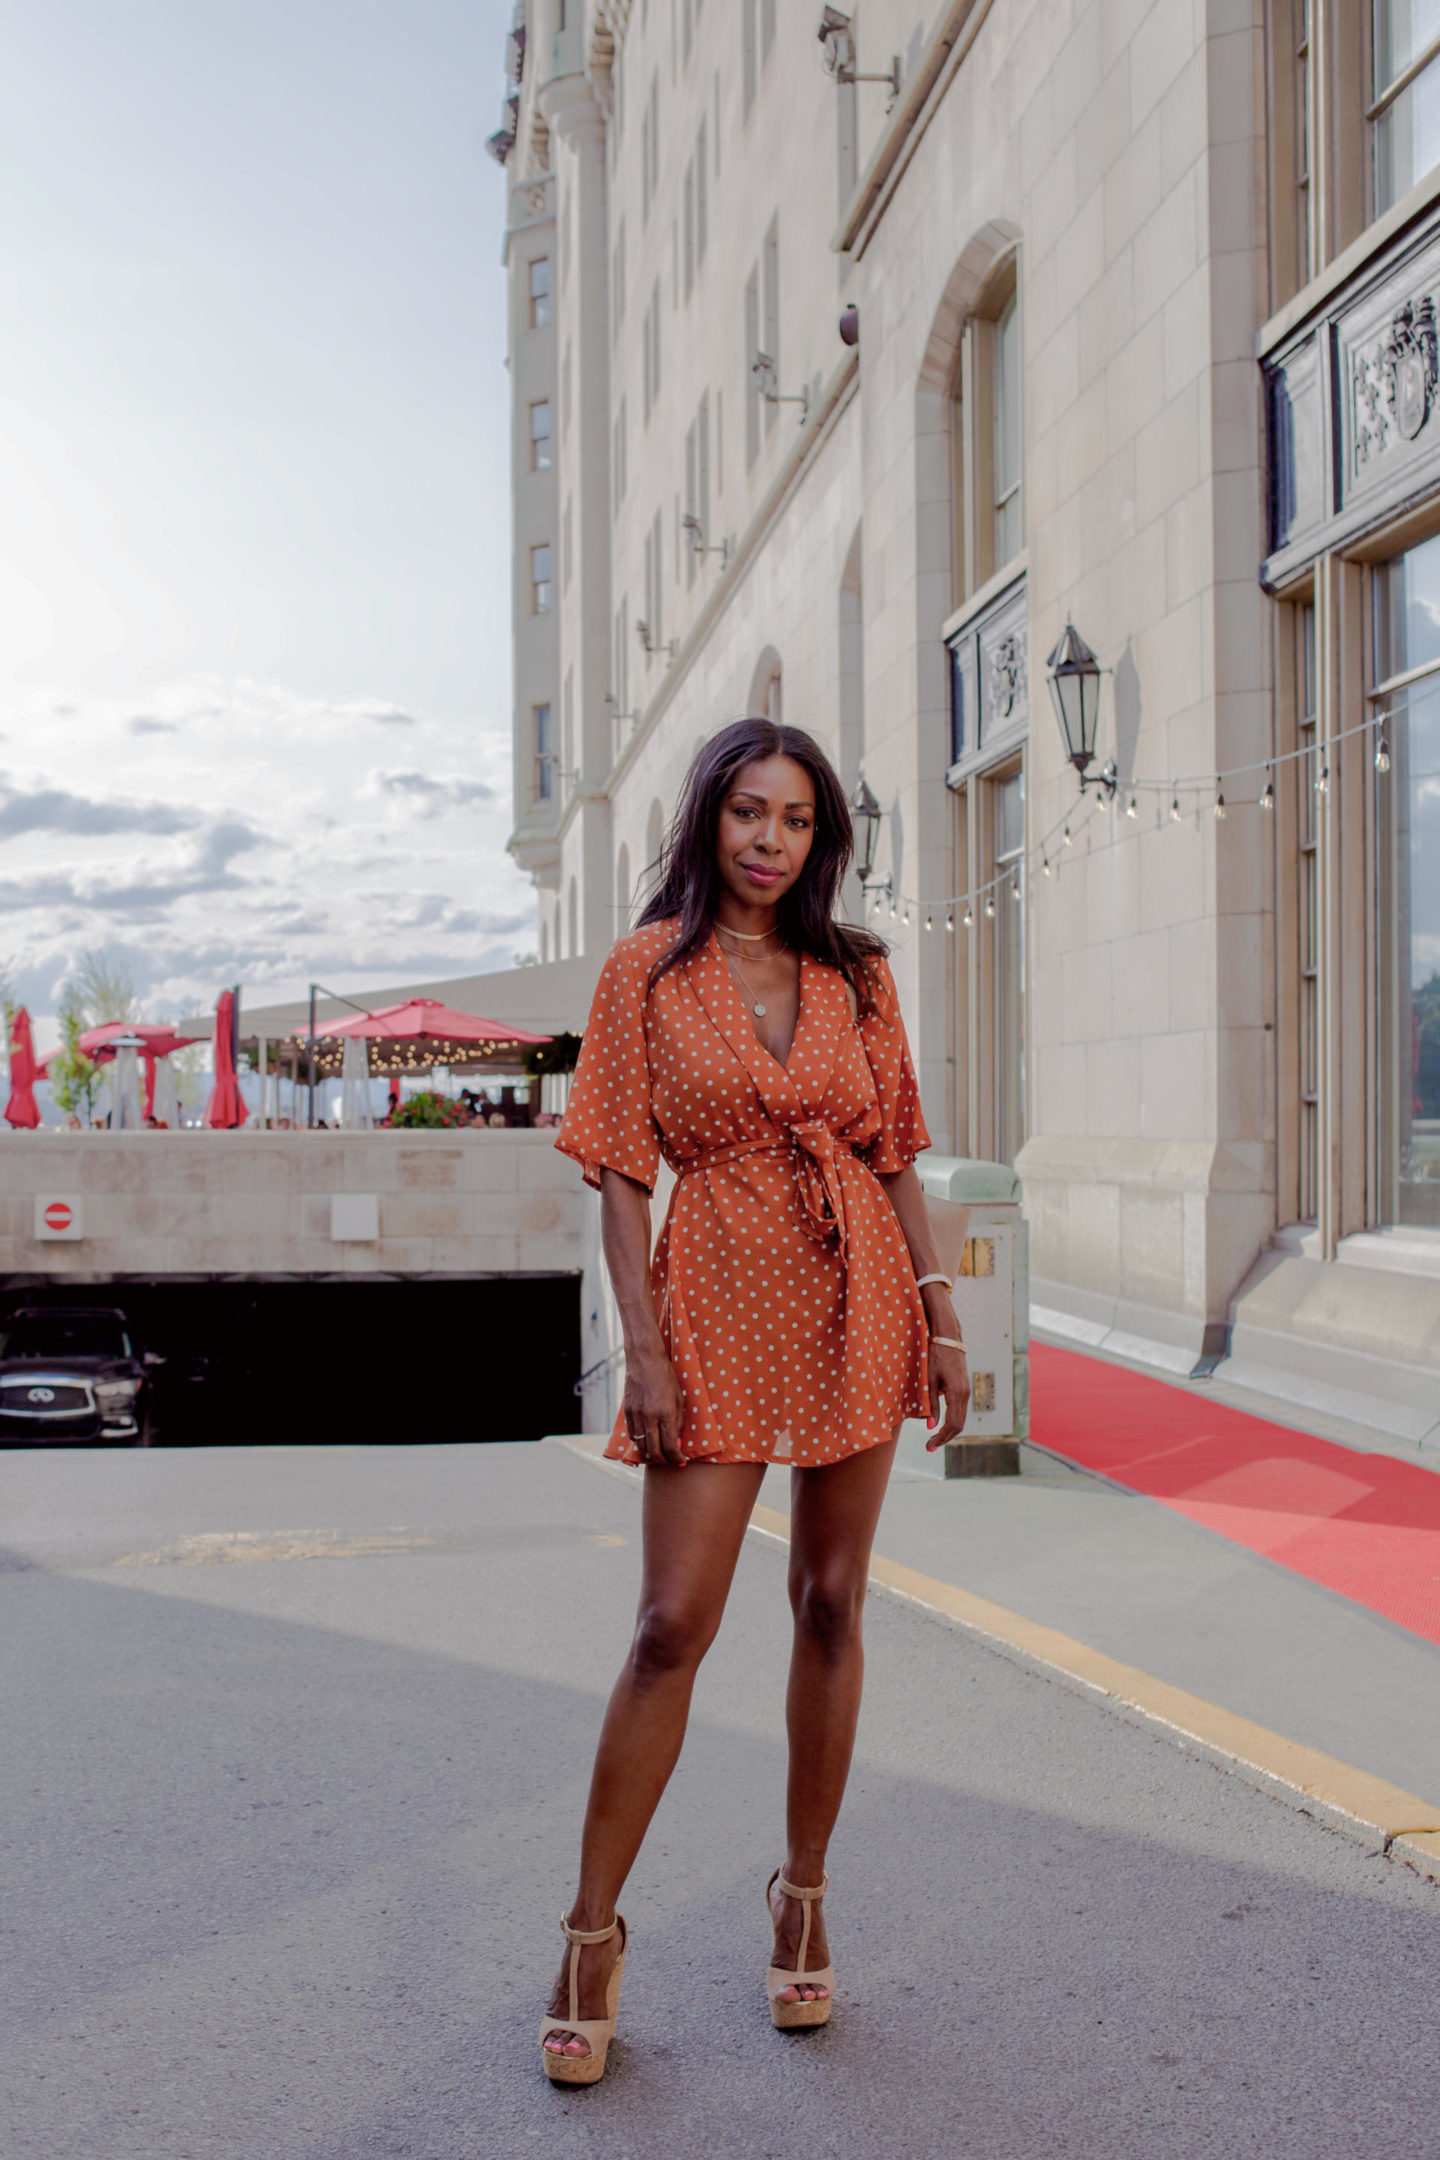 Dominique Baker in Pretty Little Thing Dress at Fairmont Chateau Laurier